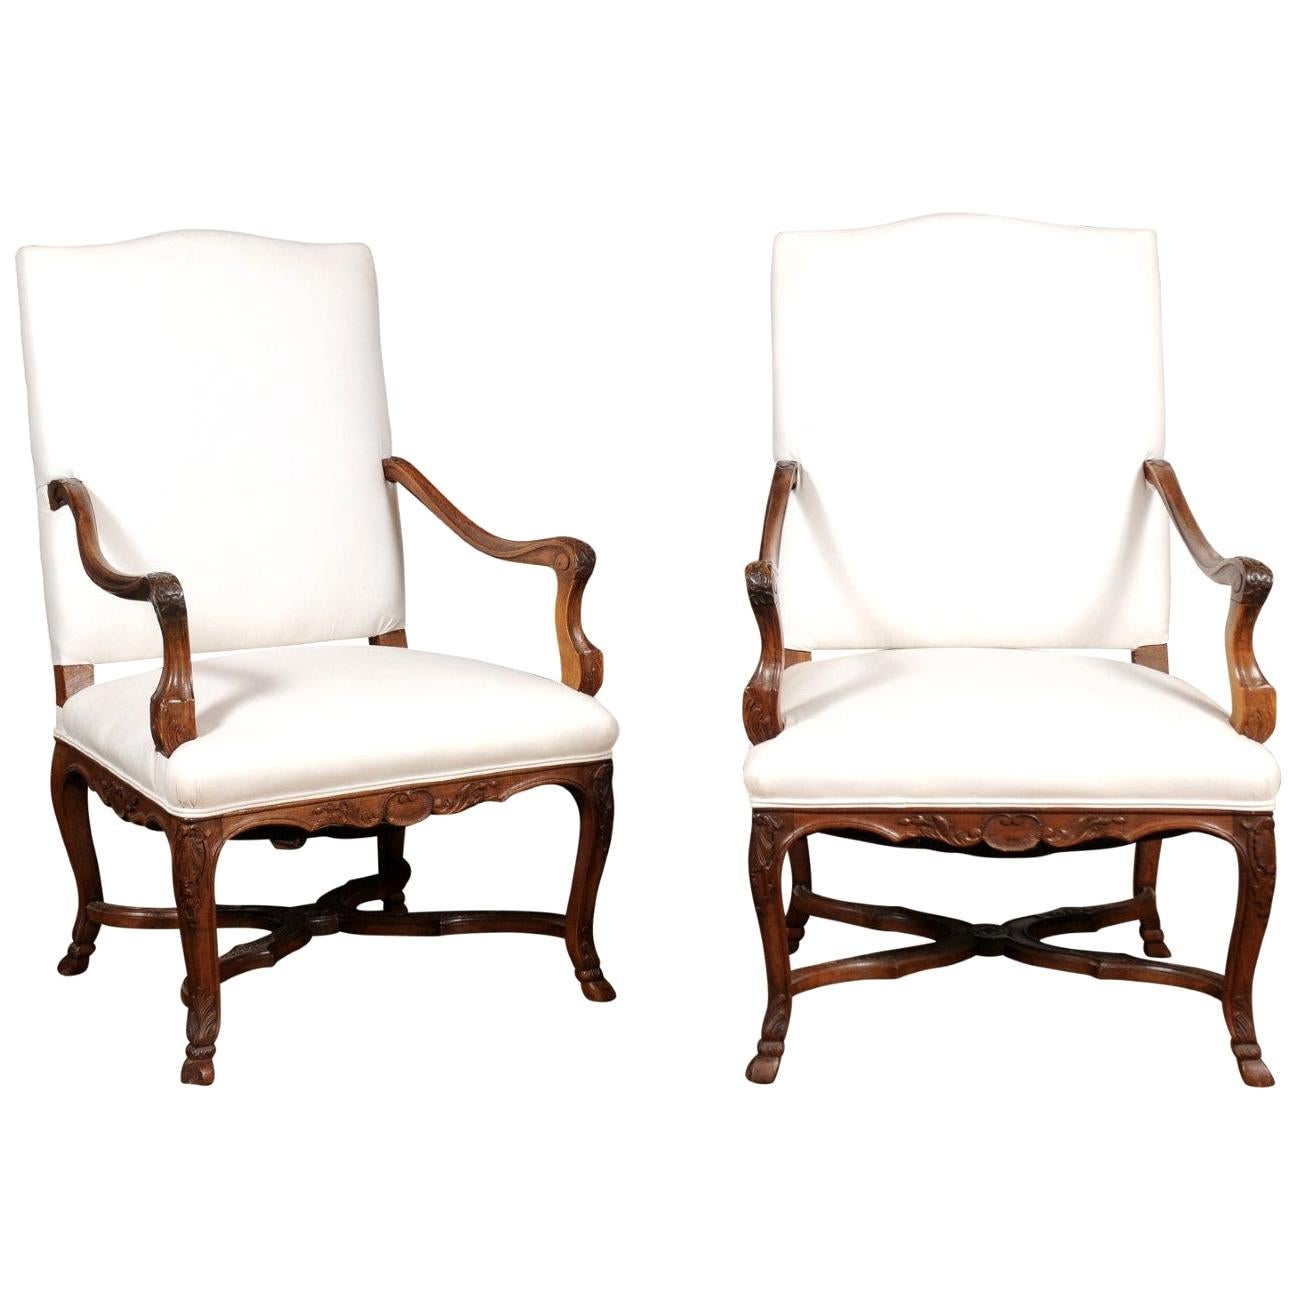 Pair of French Régence Style 19th Century Walnut Fauteuils with Carved Foliage